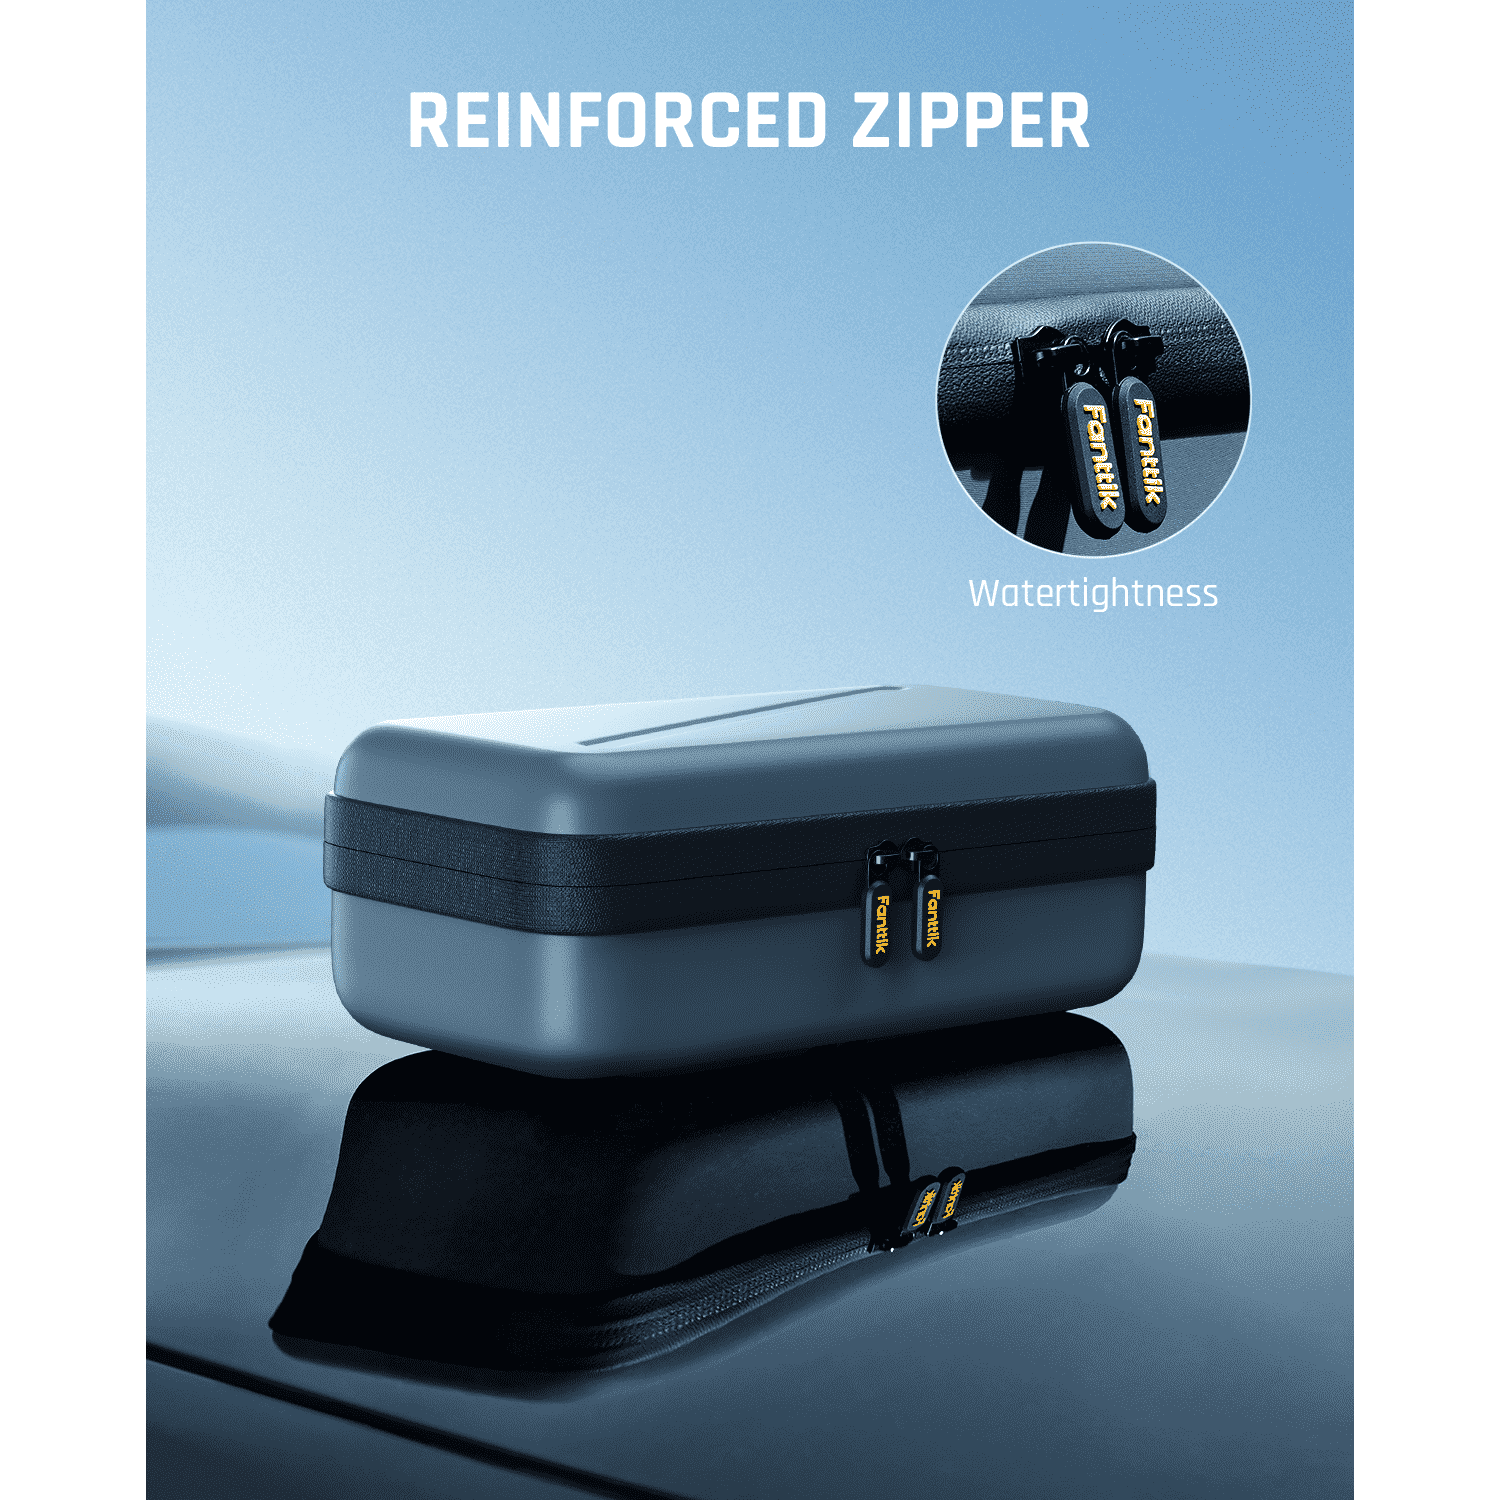 With tightened zipper supporting IP65 water-resistant, this EVA box can provide a securer enclosure that makes it waterproof and dust-proof to better protect your X8 APEX